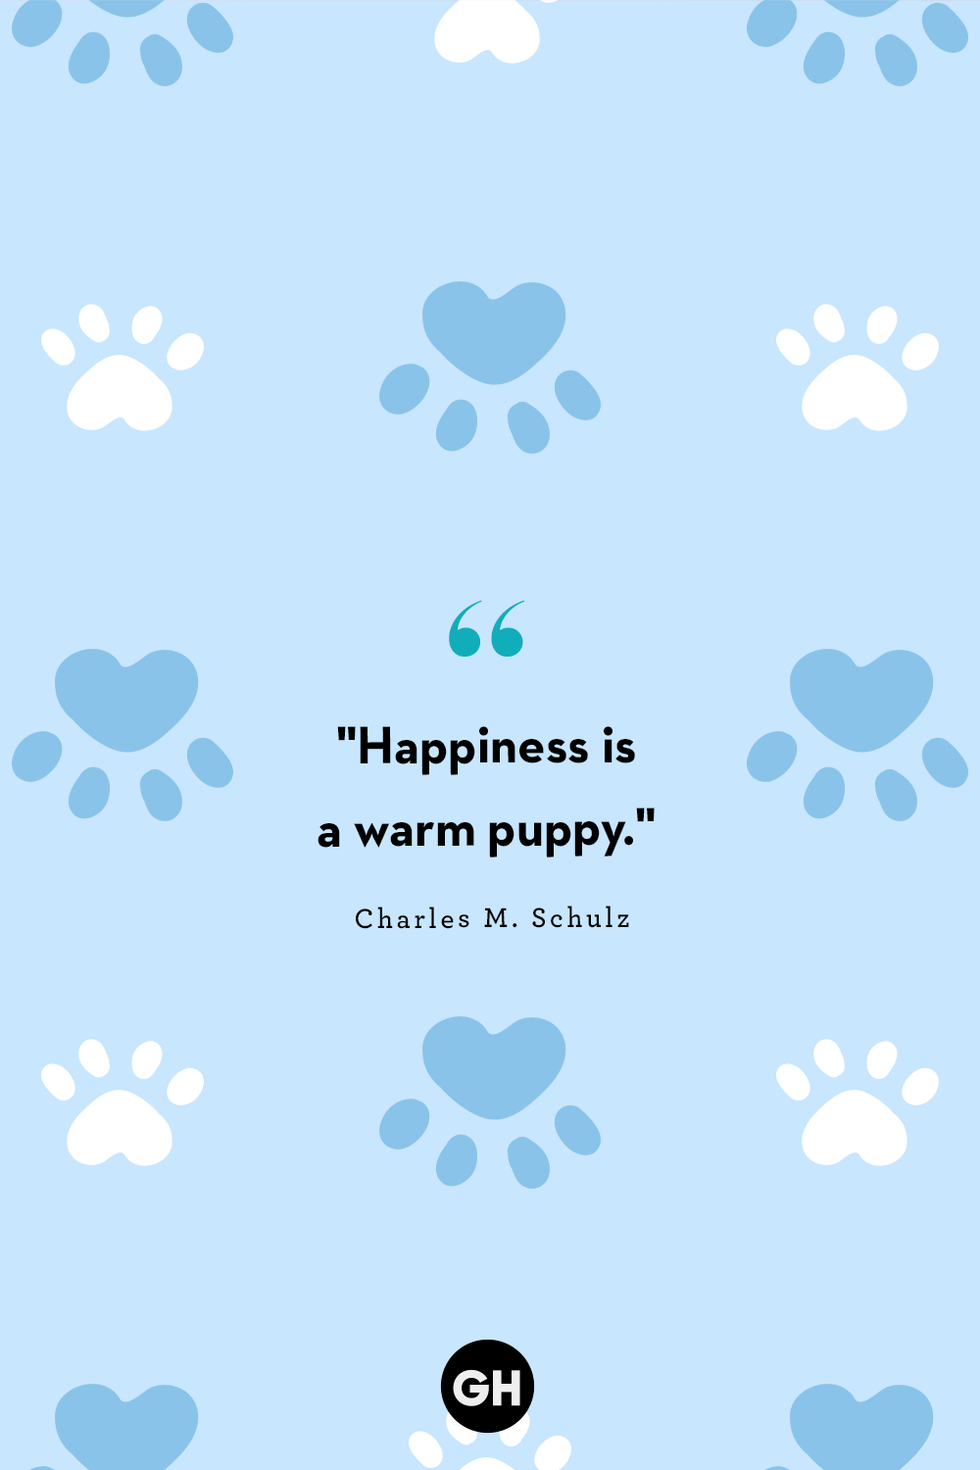 dog quote card with paw prints